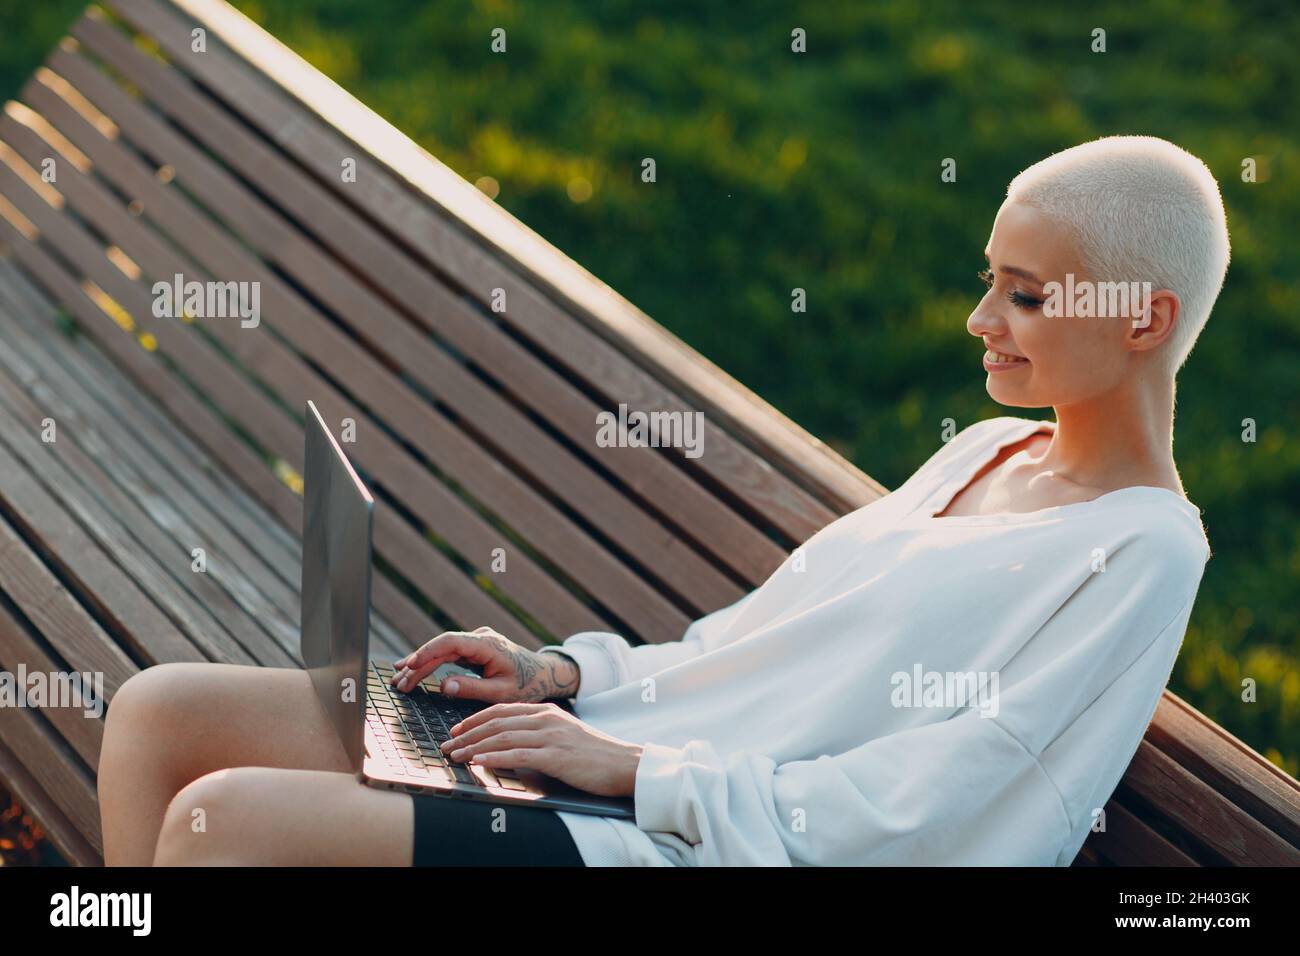 Millenial young woman blonde short hair outdoor smiling portrait with laptop. Stock Photo